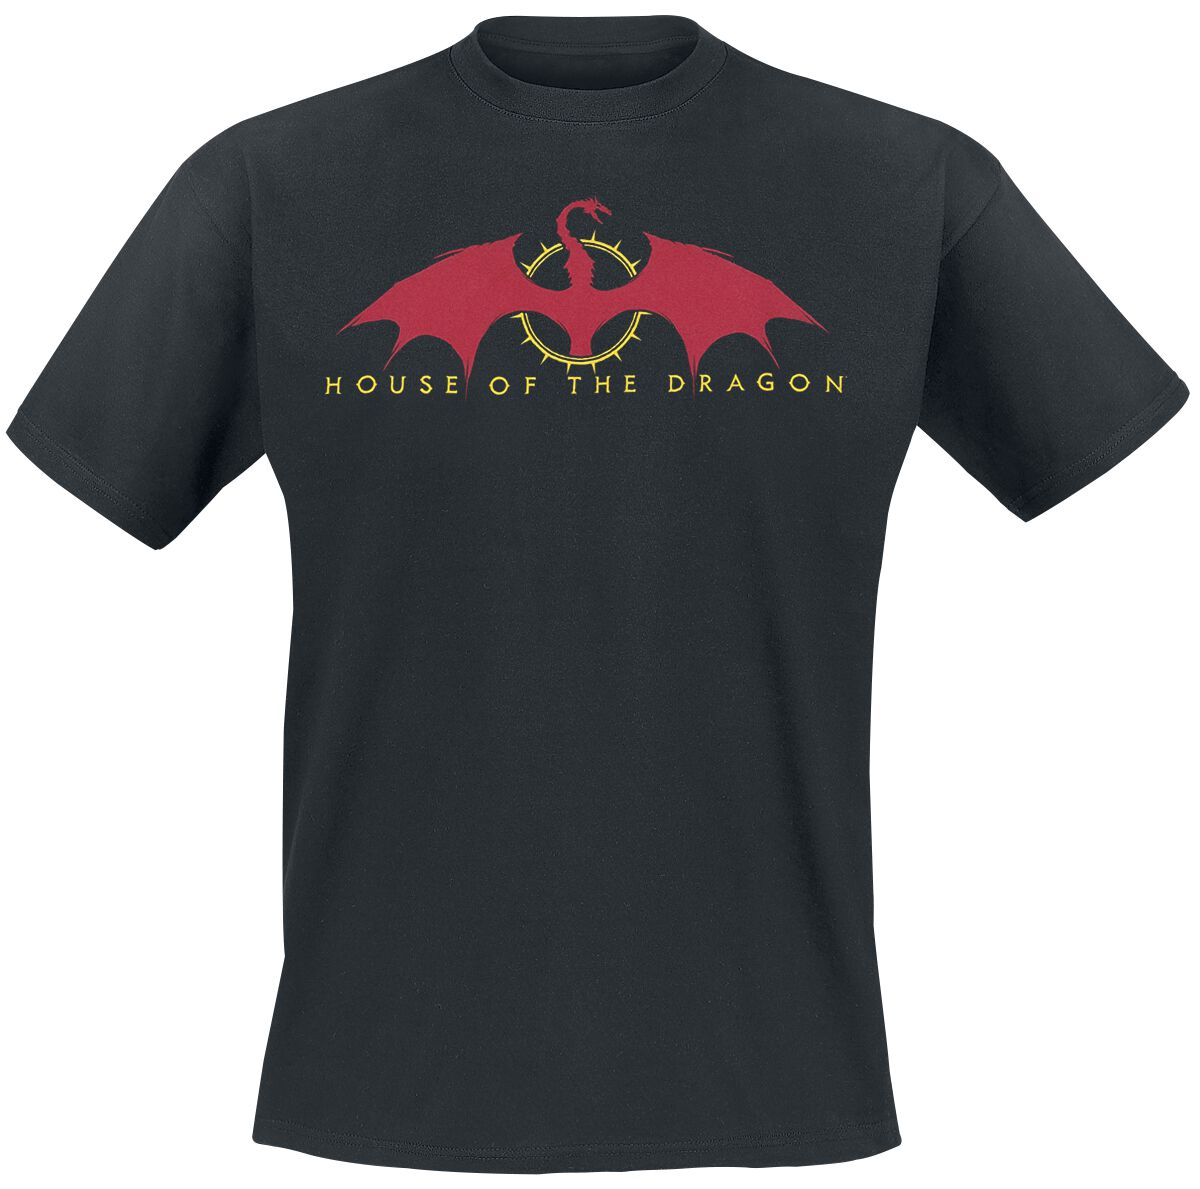 Game of Thrones House of the Dragon - Red wings T-Shirt black